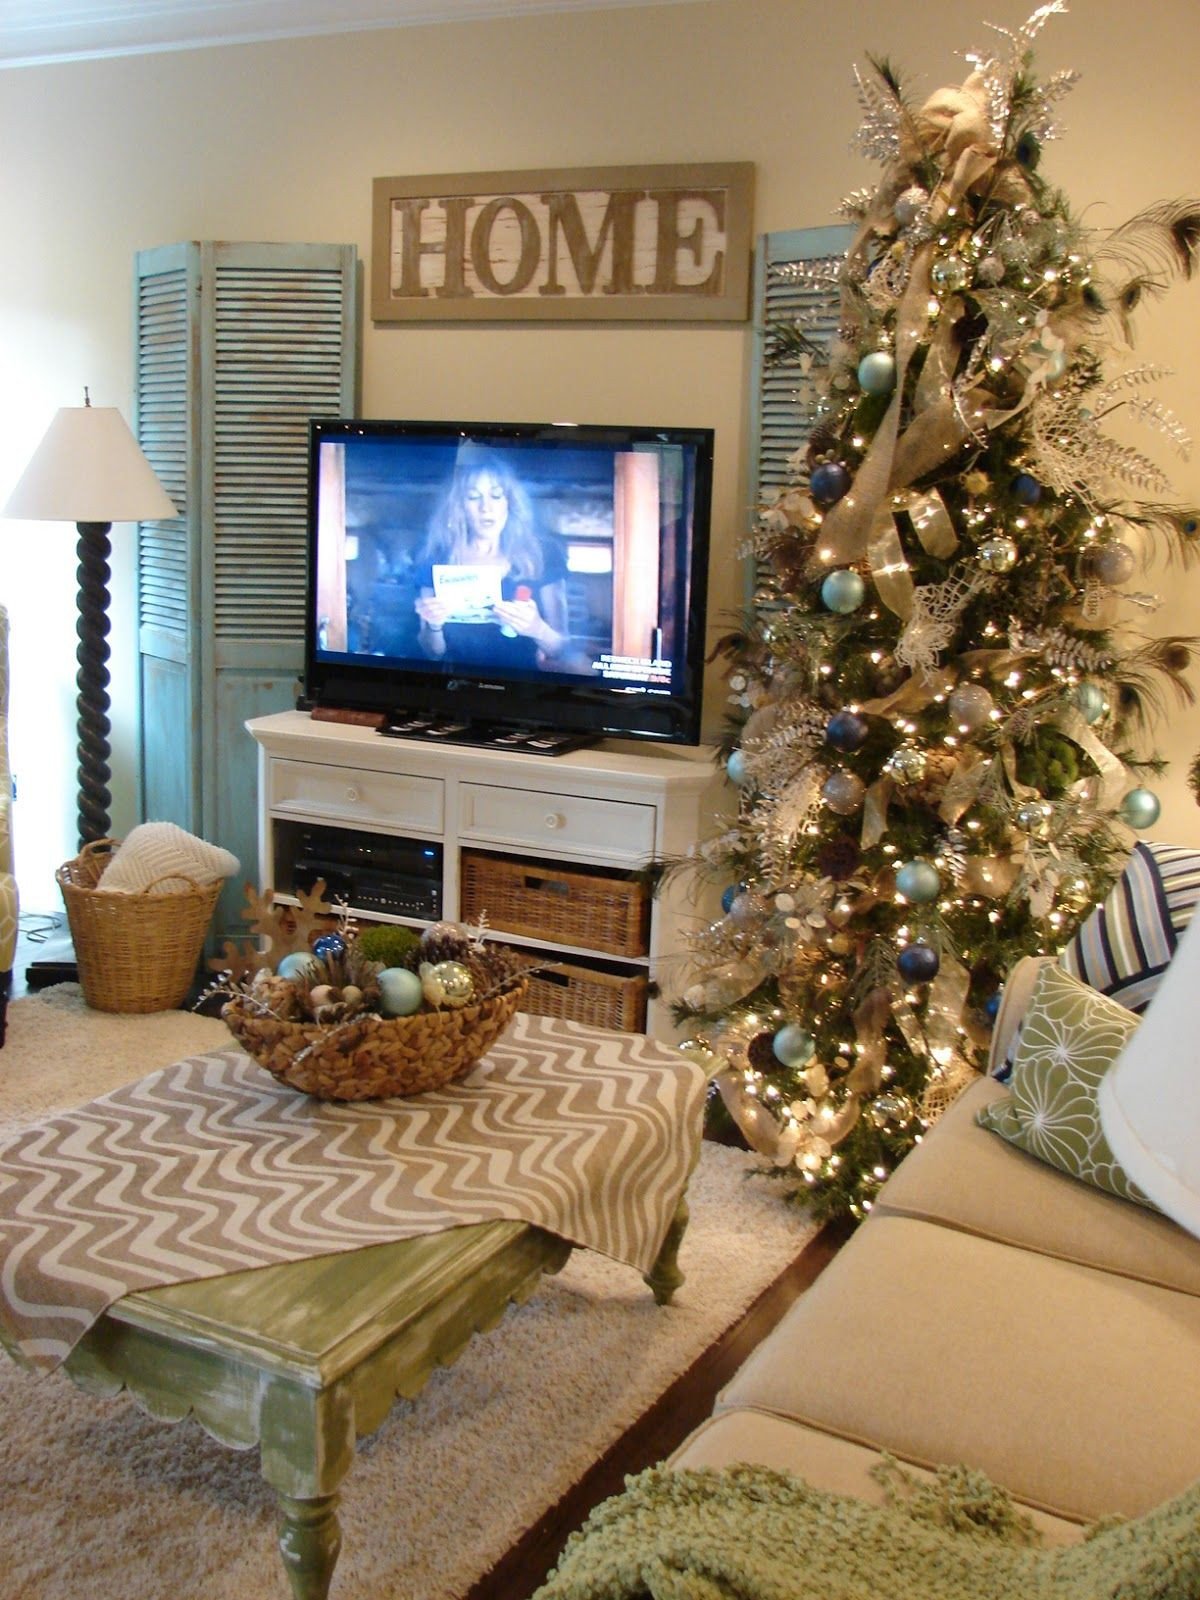 19 Amazing Diy TV Stand Ideas You can Build Right Now